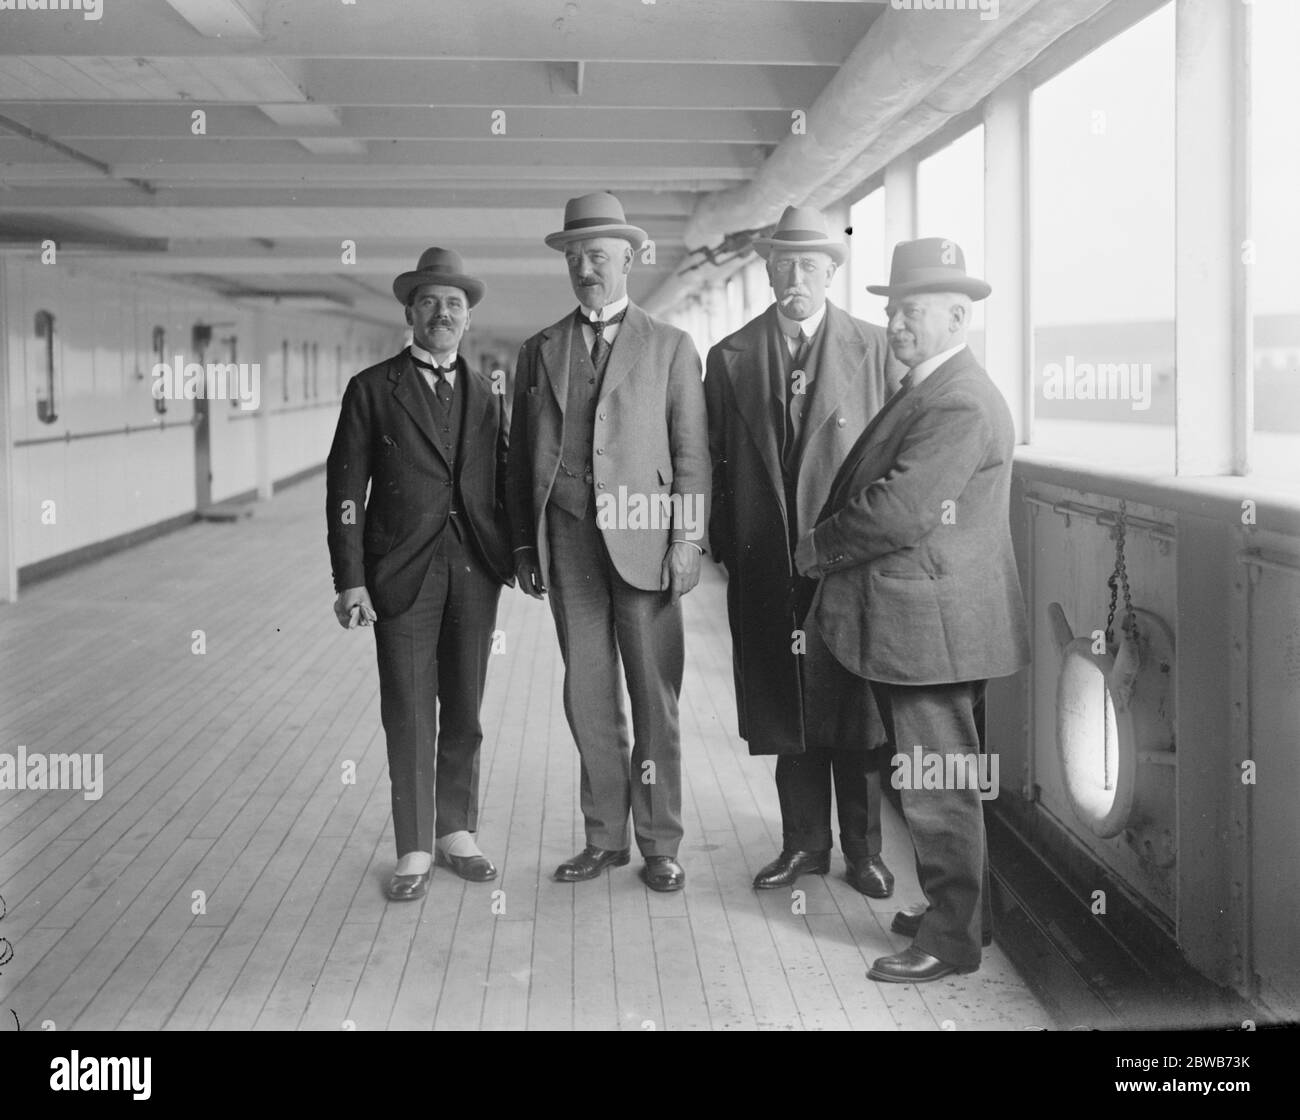 The latest oil burning liner . The White Star liner , SS Homeric  was inspected at Southampton Docks after her conversion into an oil burning liner . Left to right : Colonel H Concannon , OBE , Sir Herbert A Walker , Mr P E Curry , Major Gilbert S Szlumper . 24 April 1924 Stock Photo